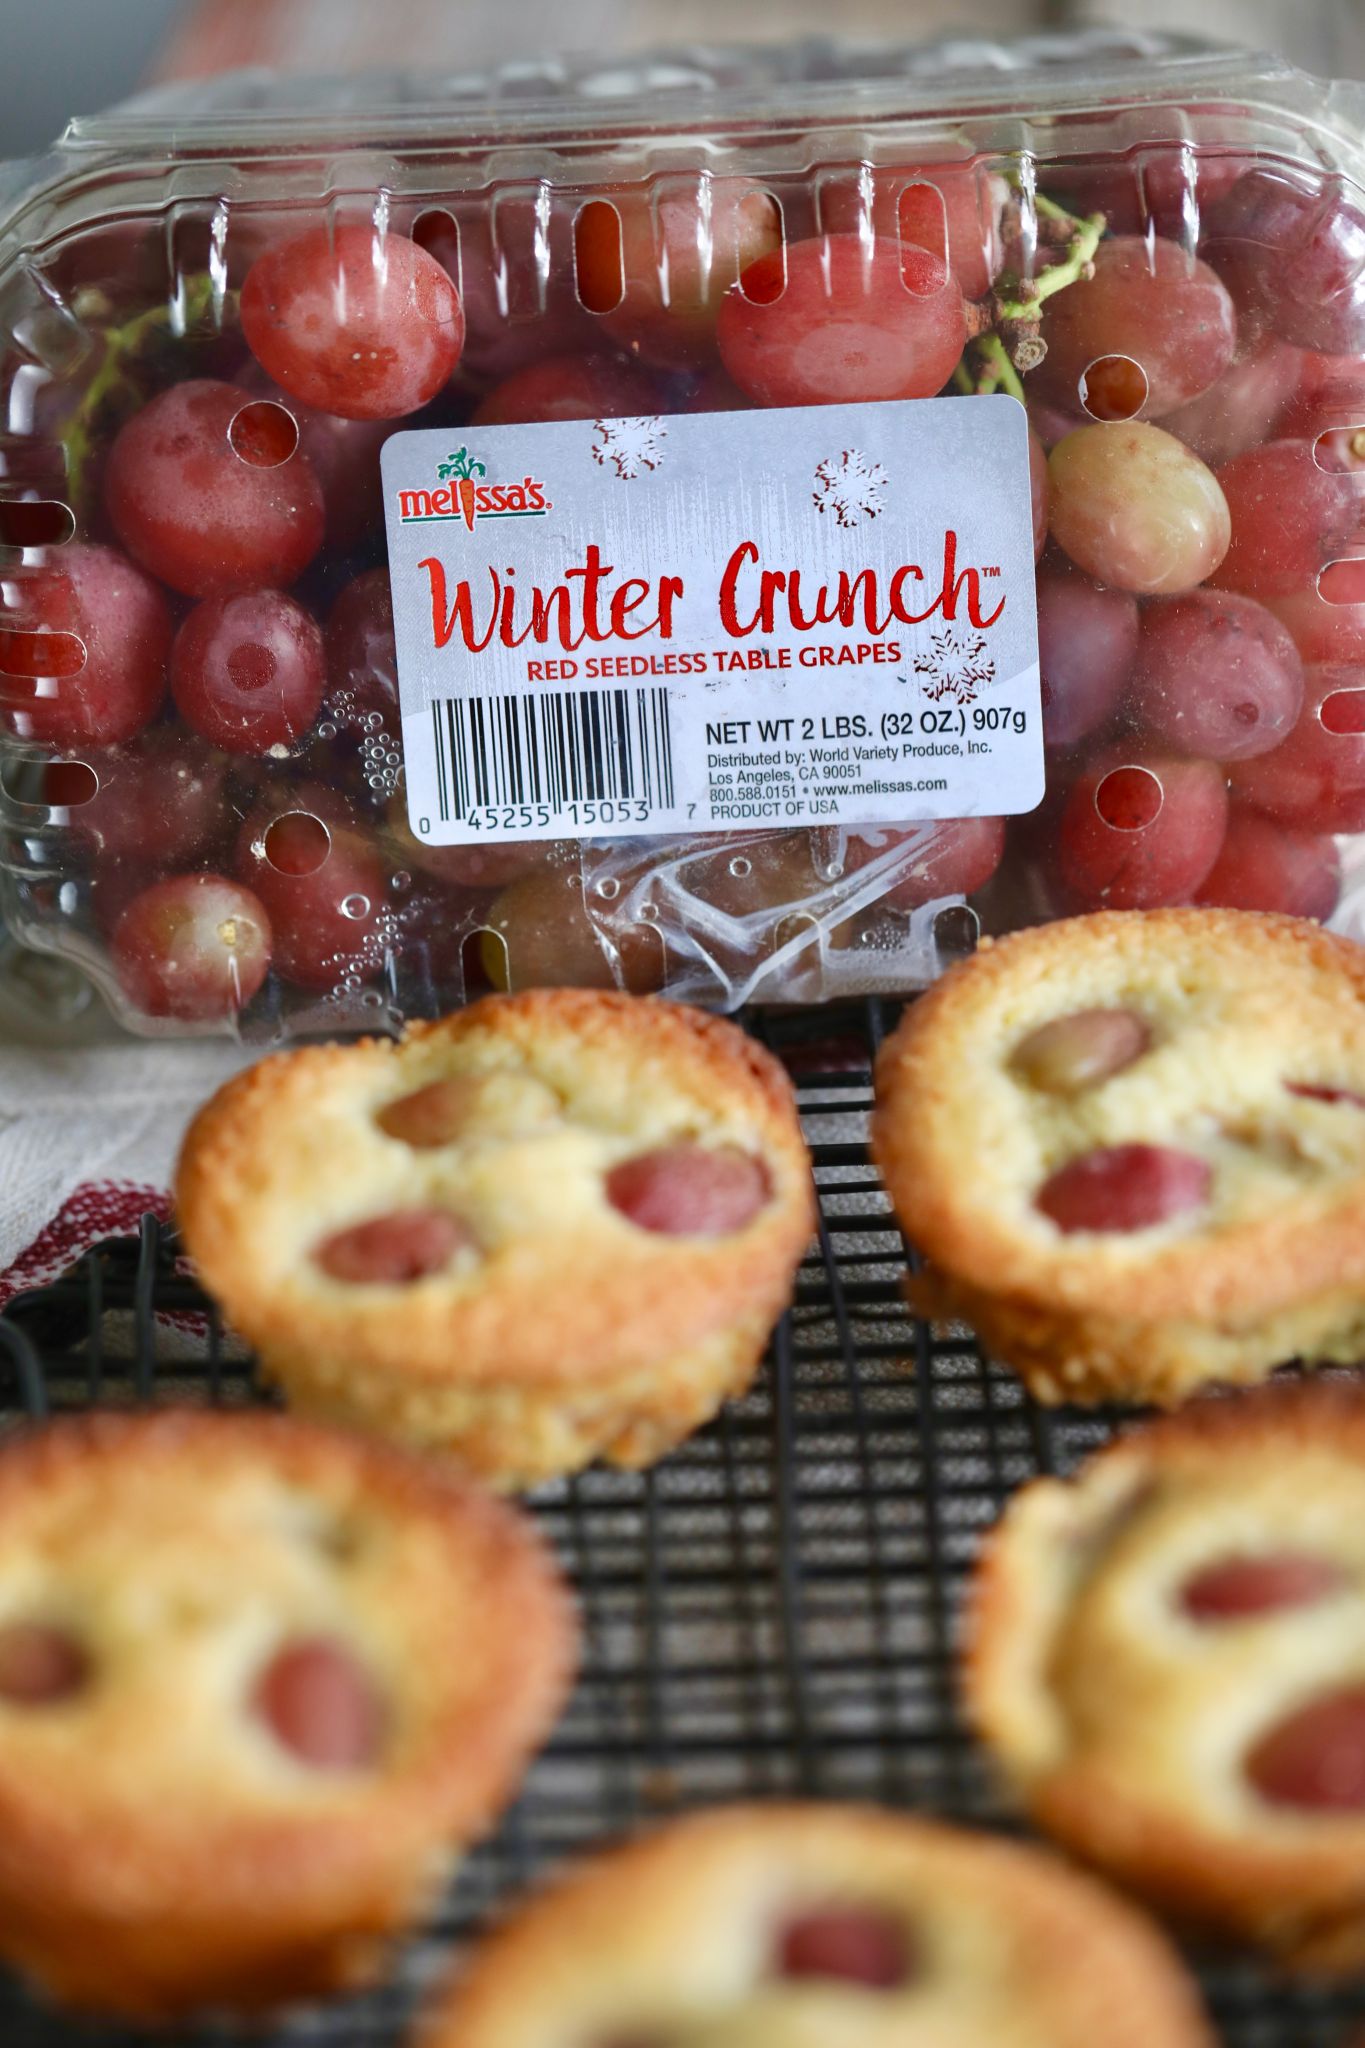 Winter Crunch Grape and Almond Cakes in front of a box of Winter Crunch Grapes.